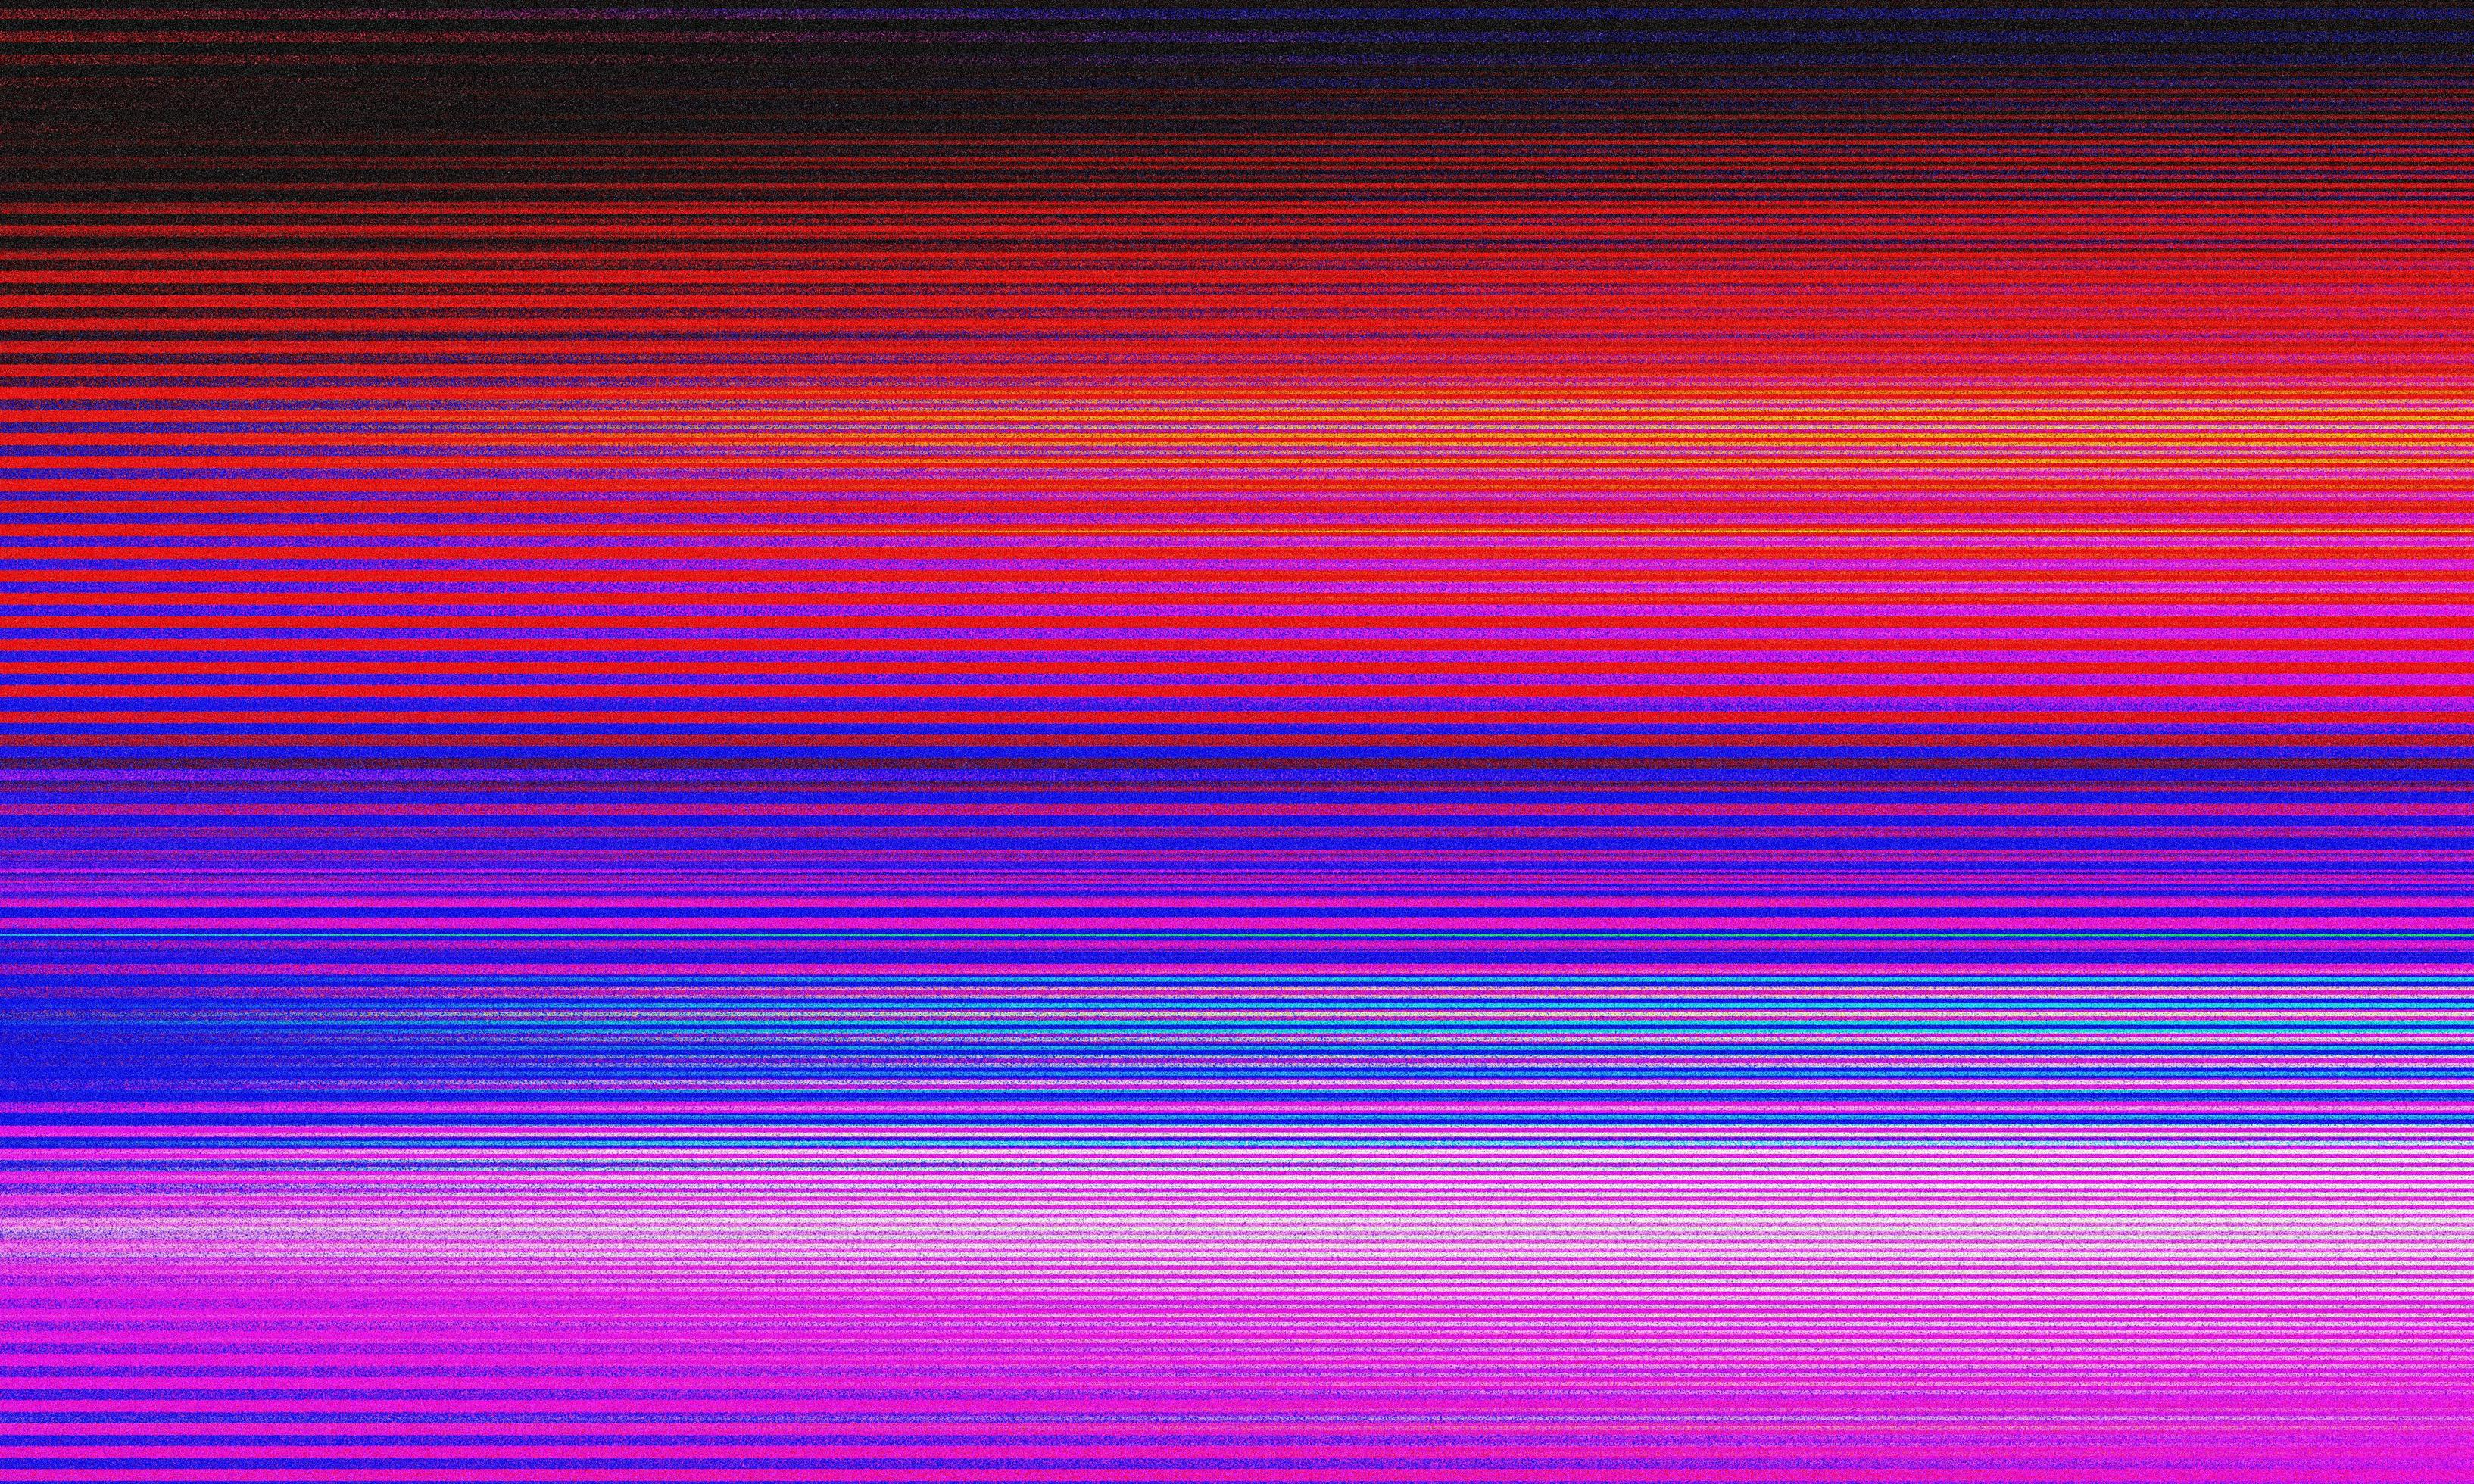 full white stripes background as a classic glitch overlay effect